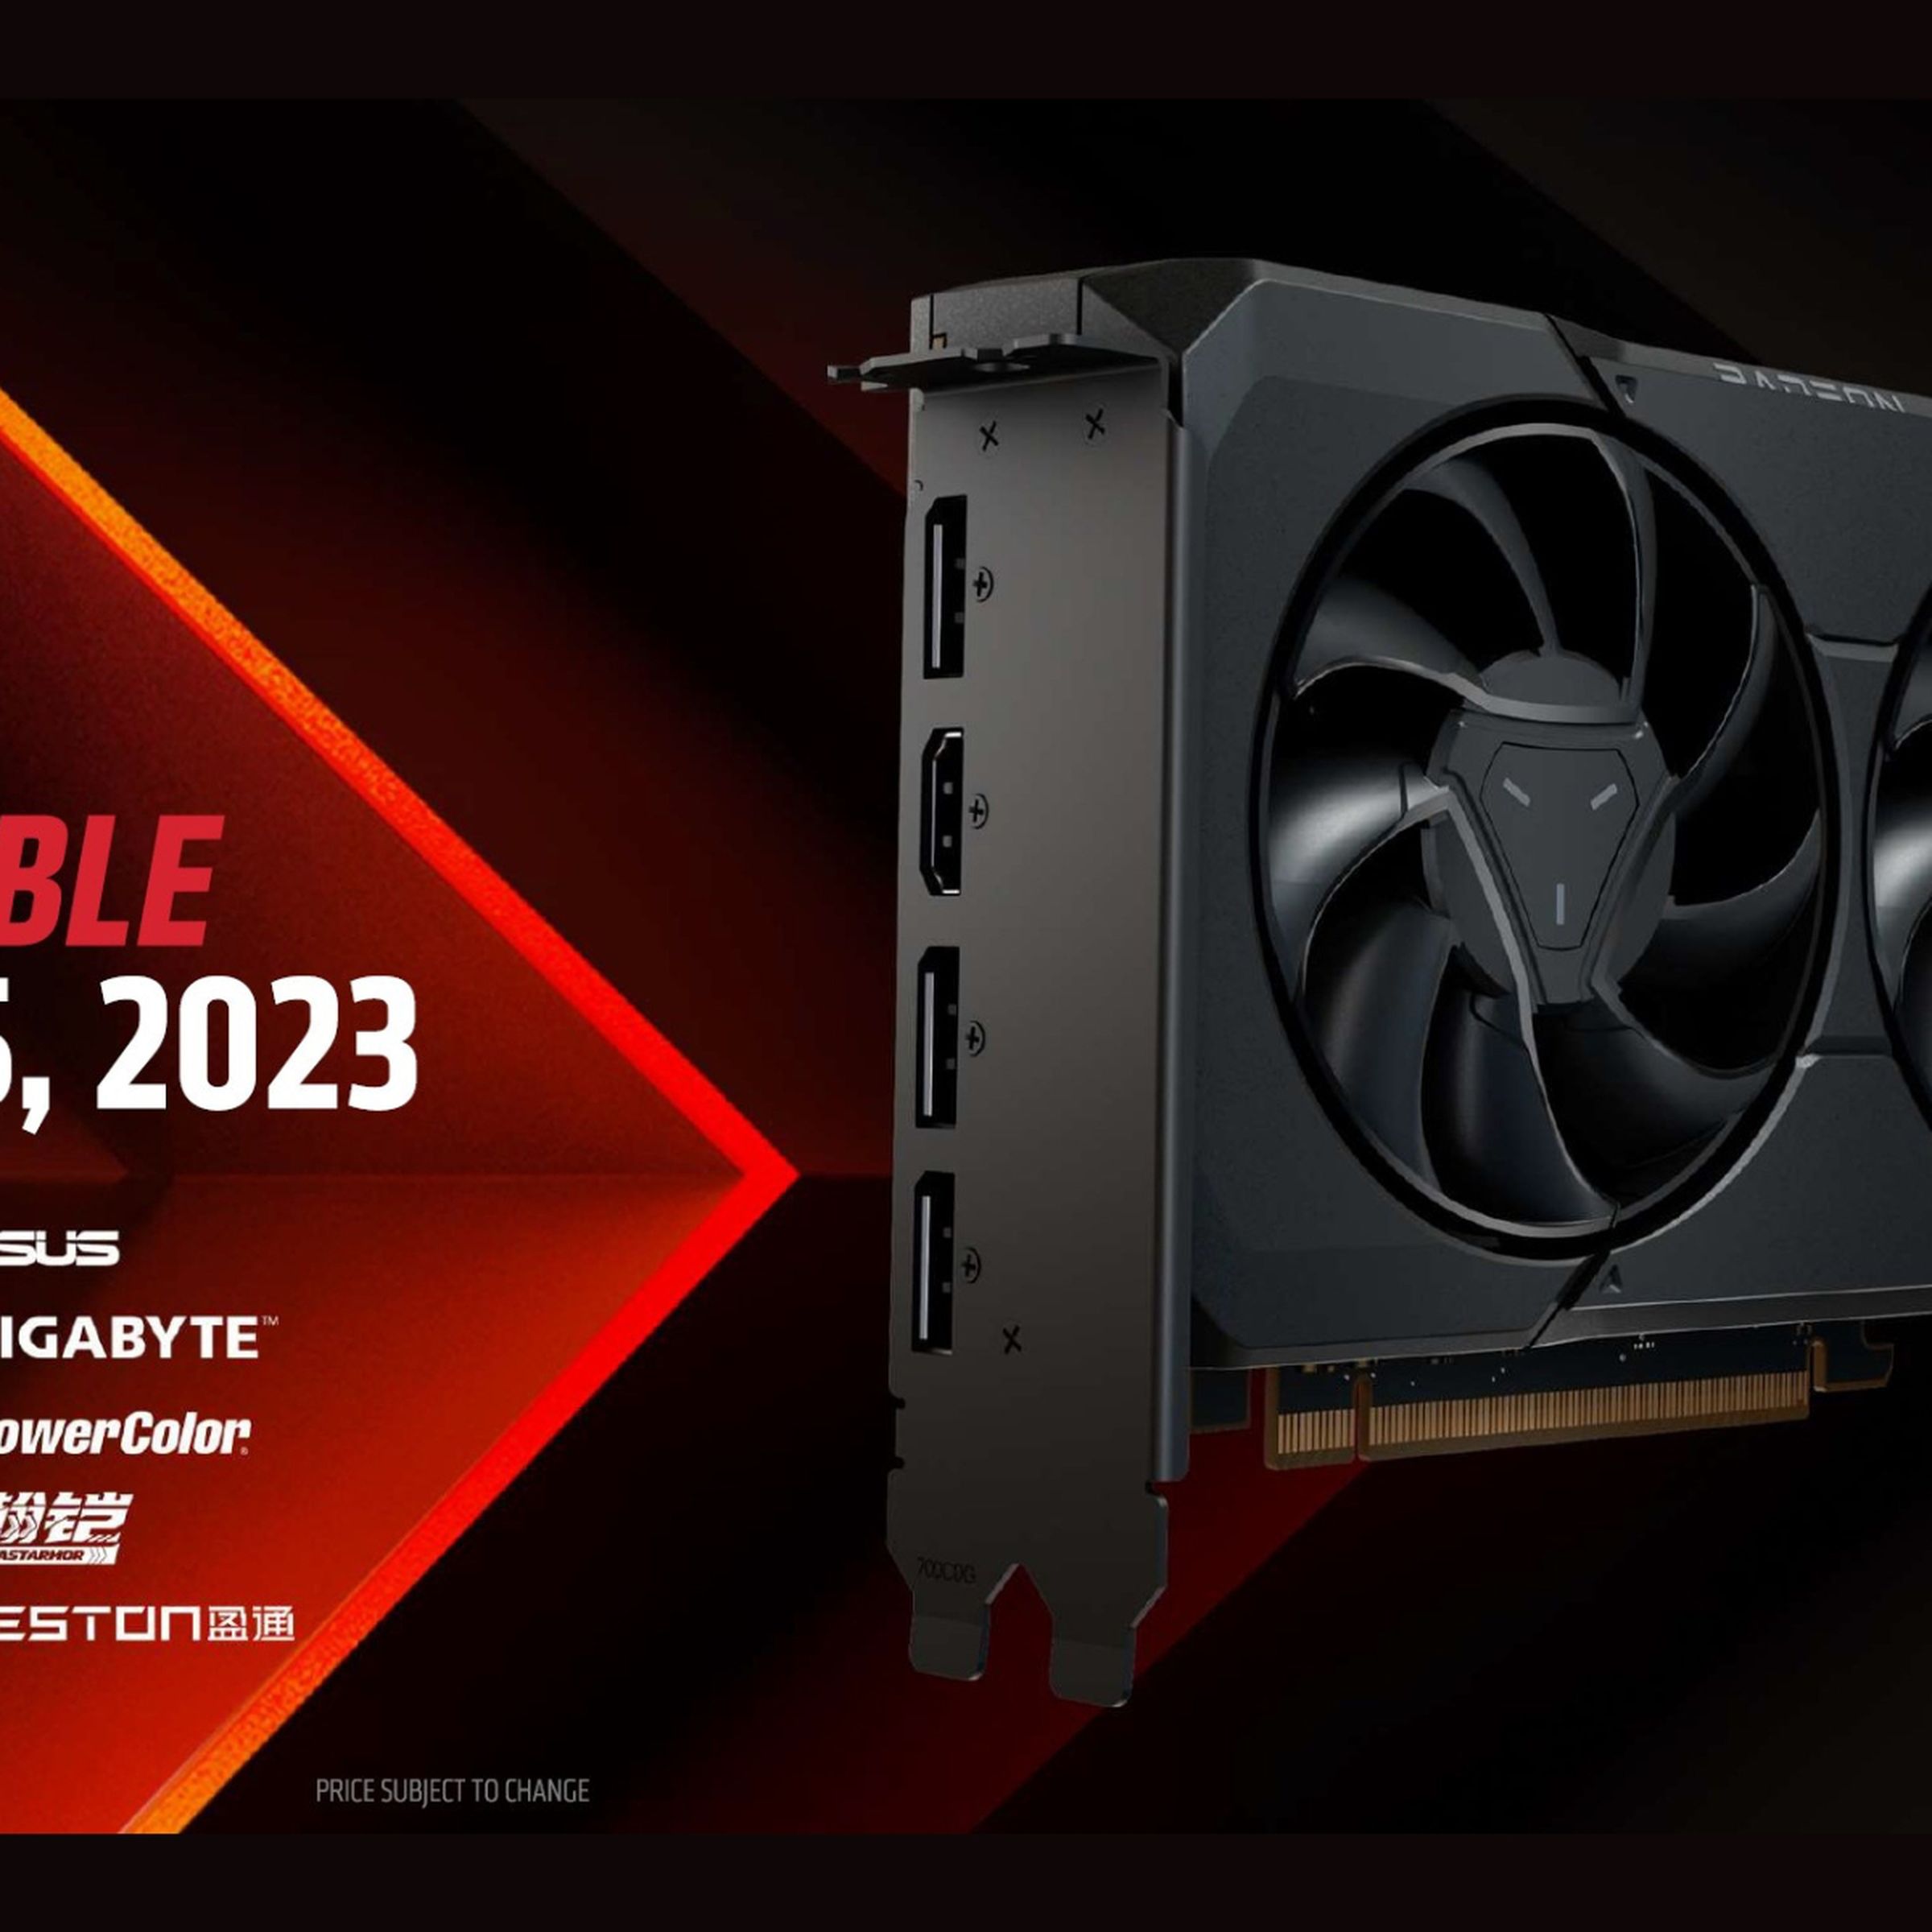 A screenshot taken from an AMD slideshow announcing that the Radeon RX 7600 GPU is available on May 25th for $269.